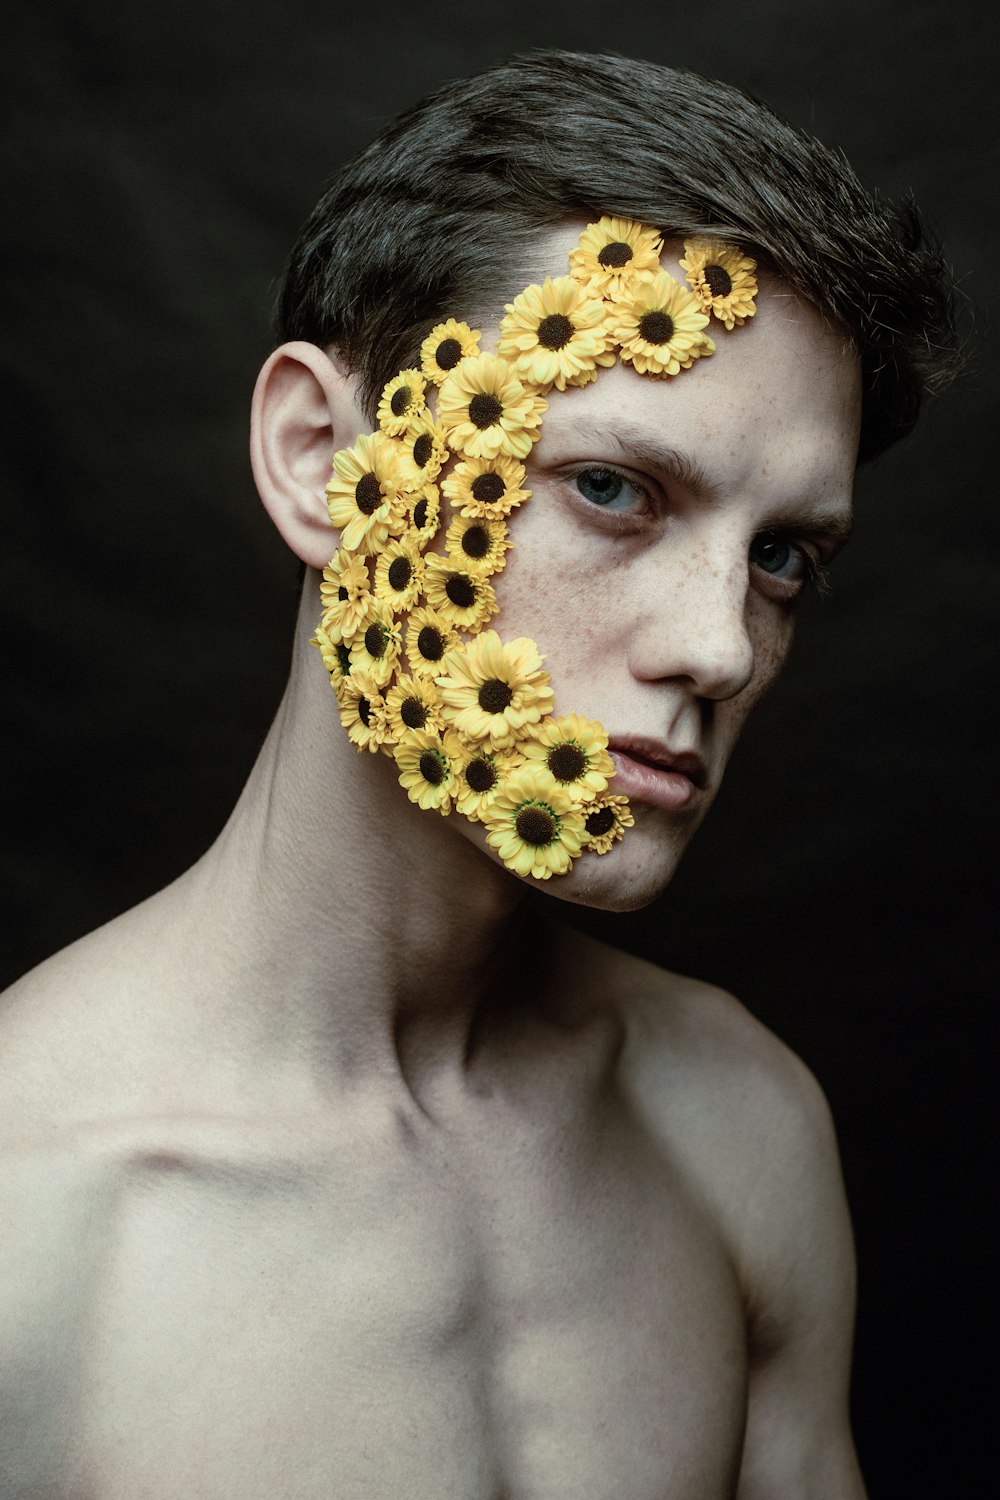 a man with sunflowers painted on his face